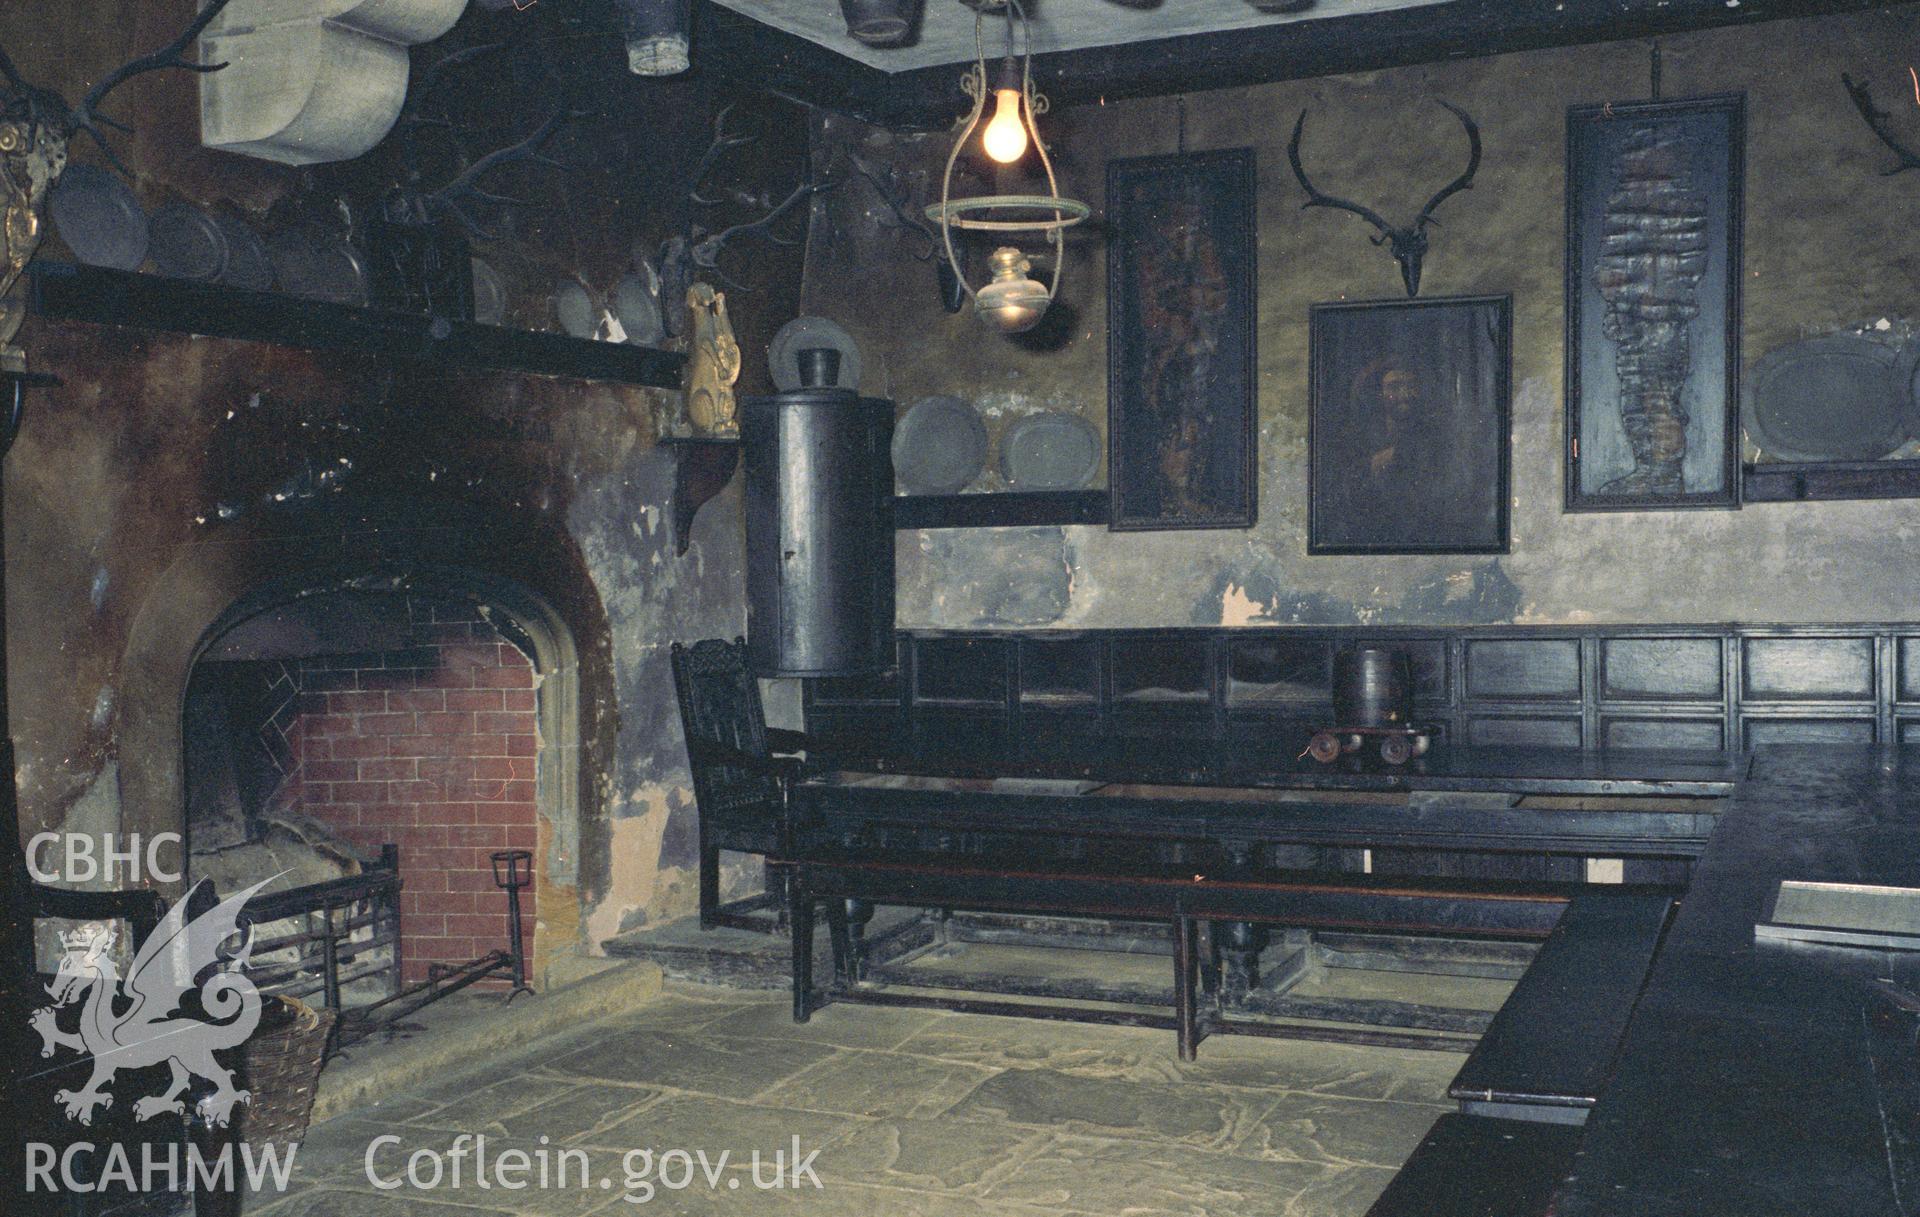 Interior view of Chirk castle collated by the former Central Office of Information.